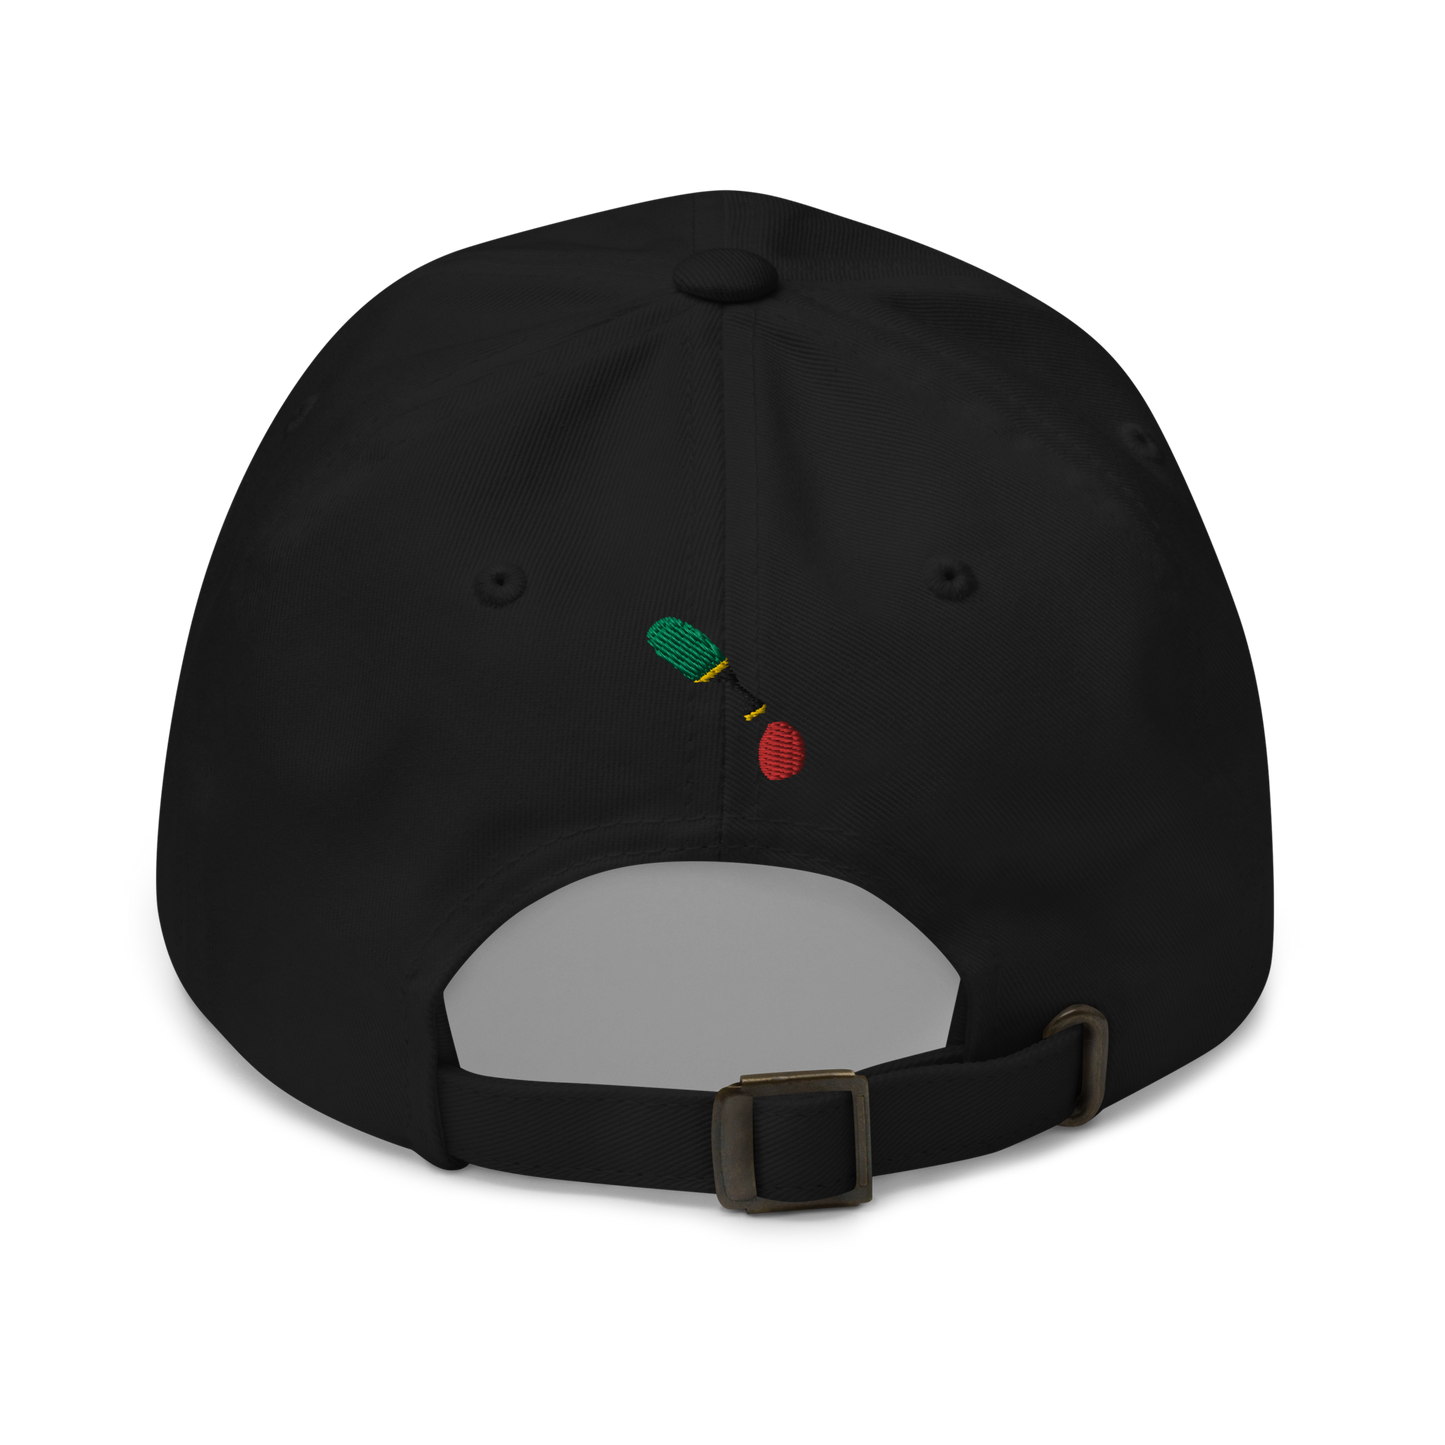 St. Kitts & Nevis -vs- The World Dad hat